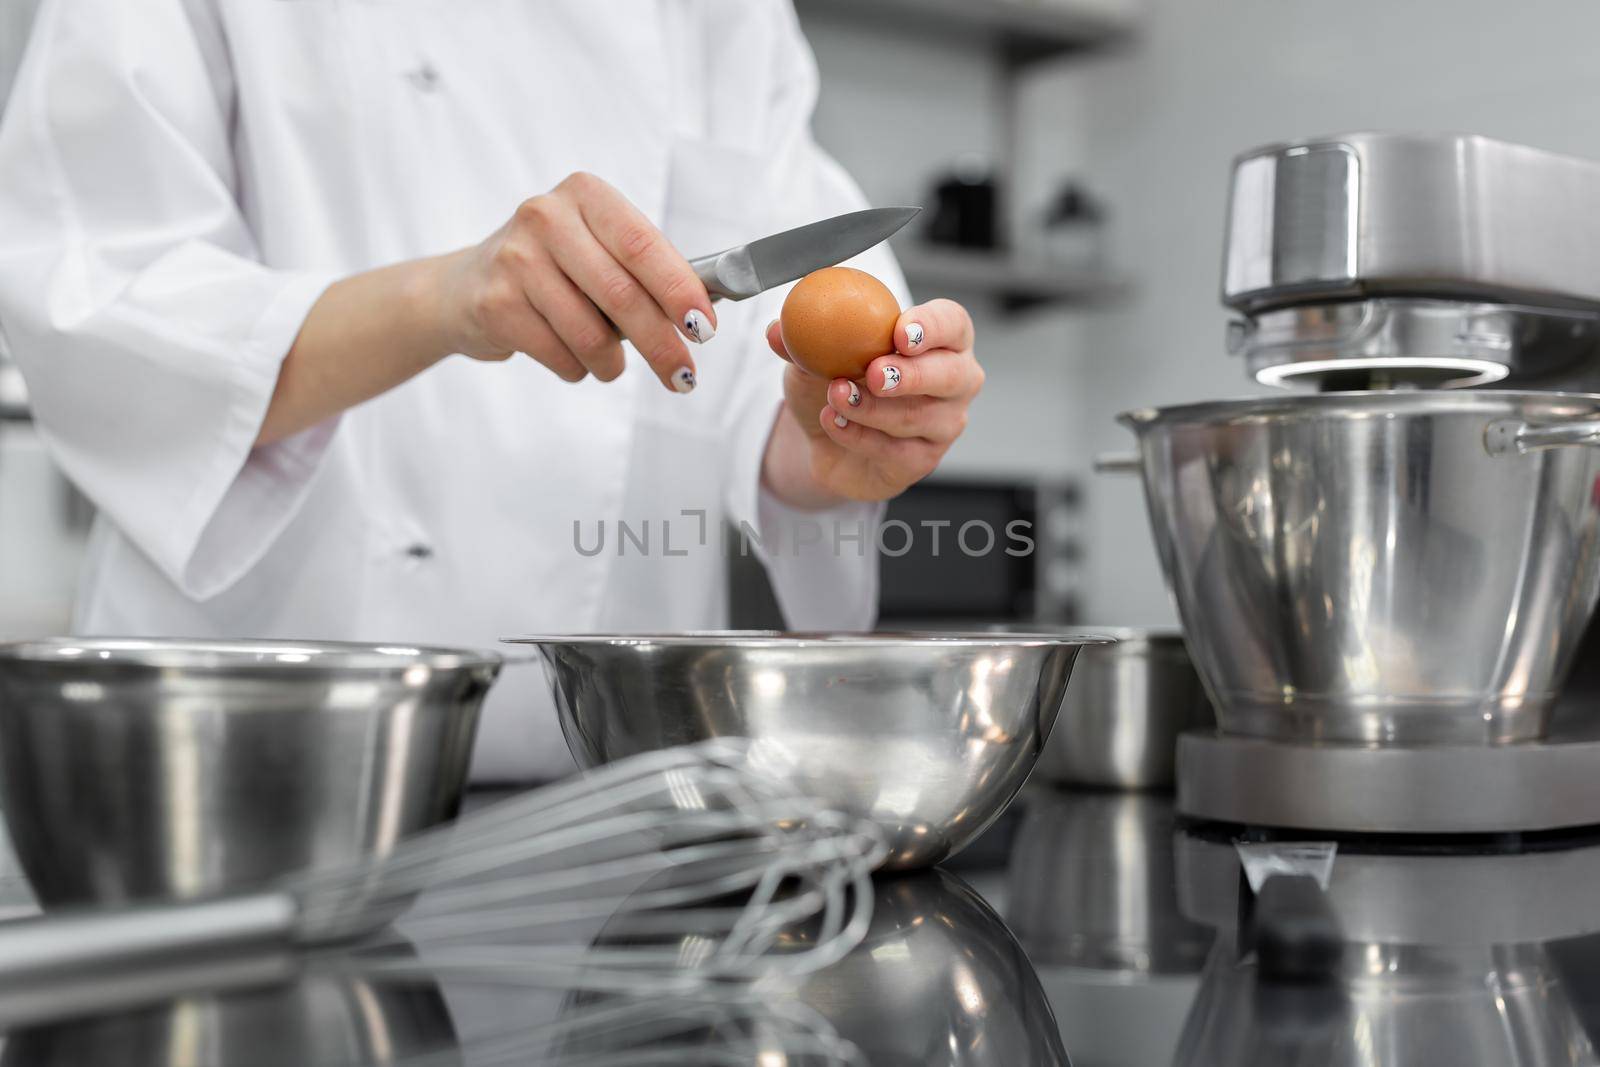 Hands of a pastry chef break an egg with a knife in a professional kitchen.